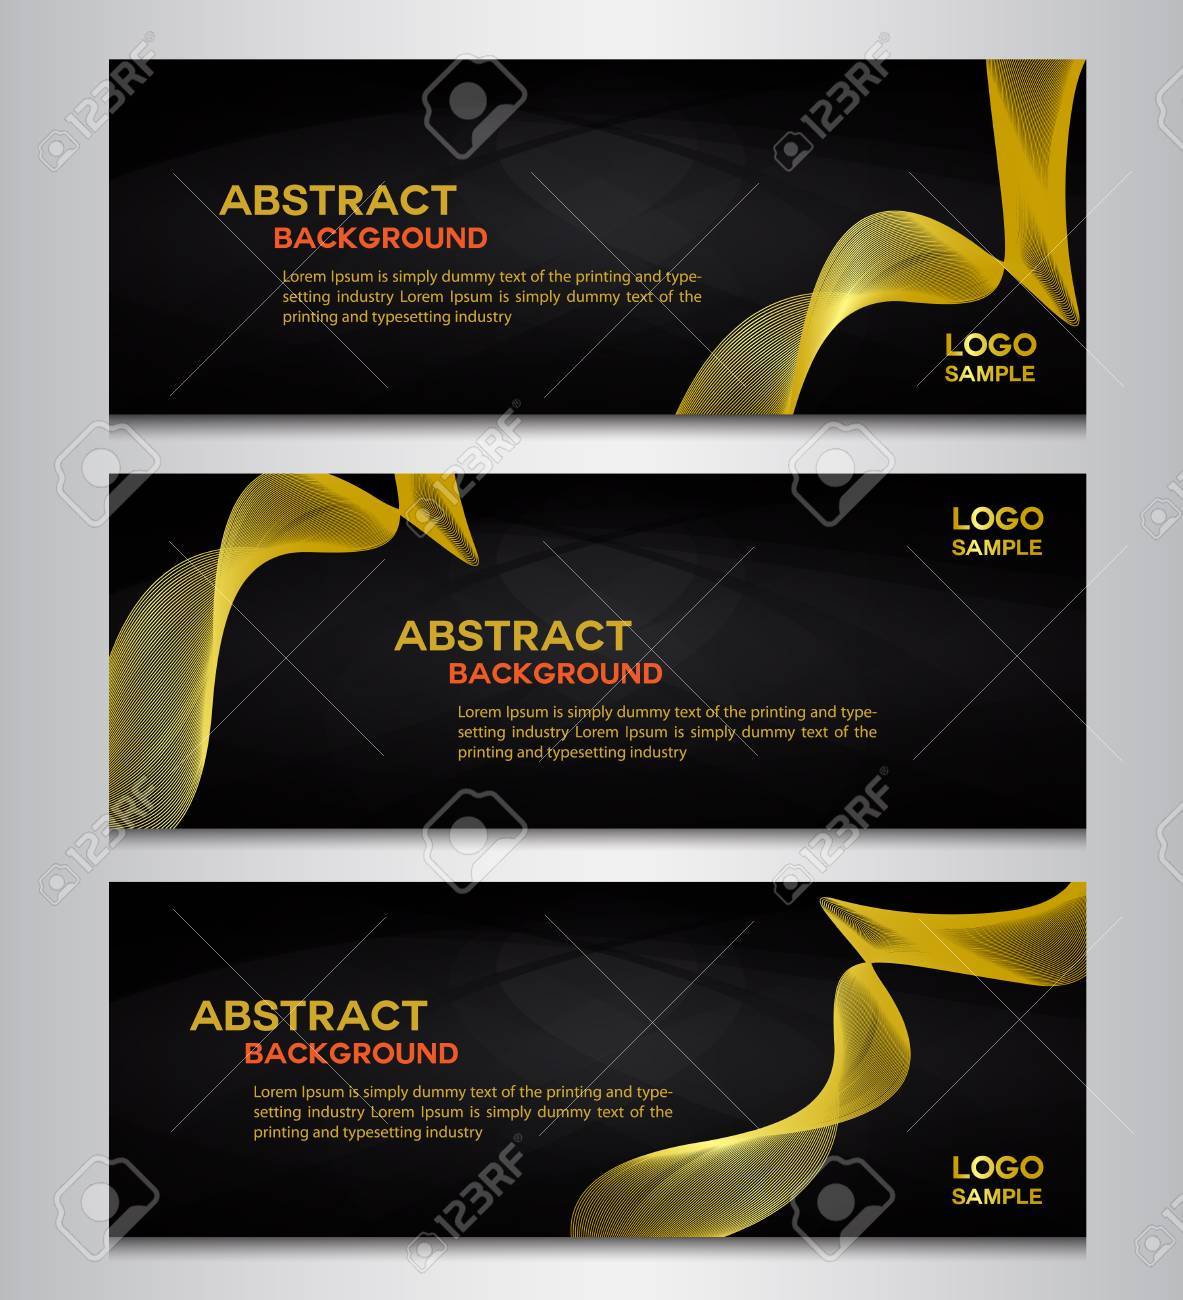 black-and-gold-banner-template